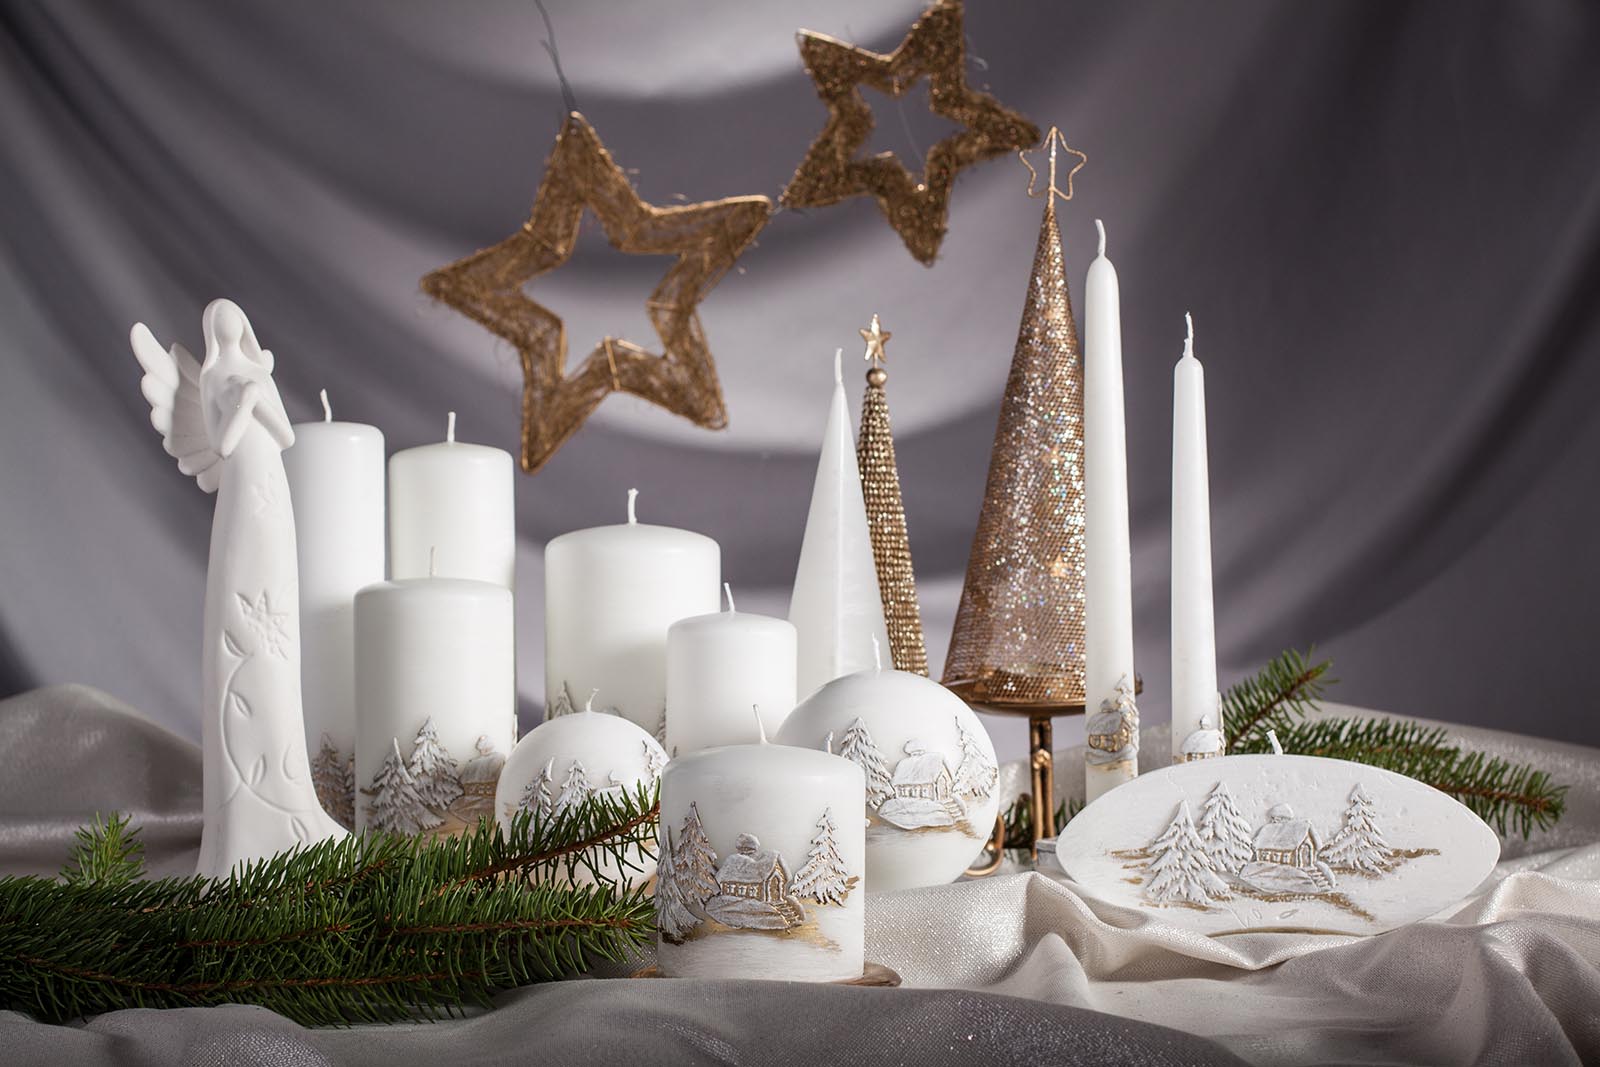 Set of winter themed candles on the white table cloth with Christmas decorations in the background and an angel figurine